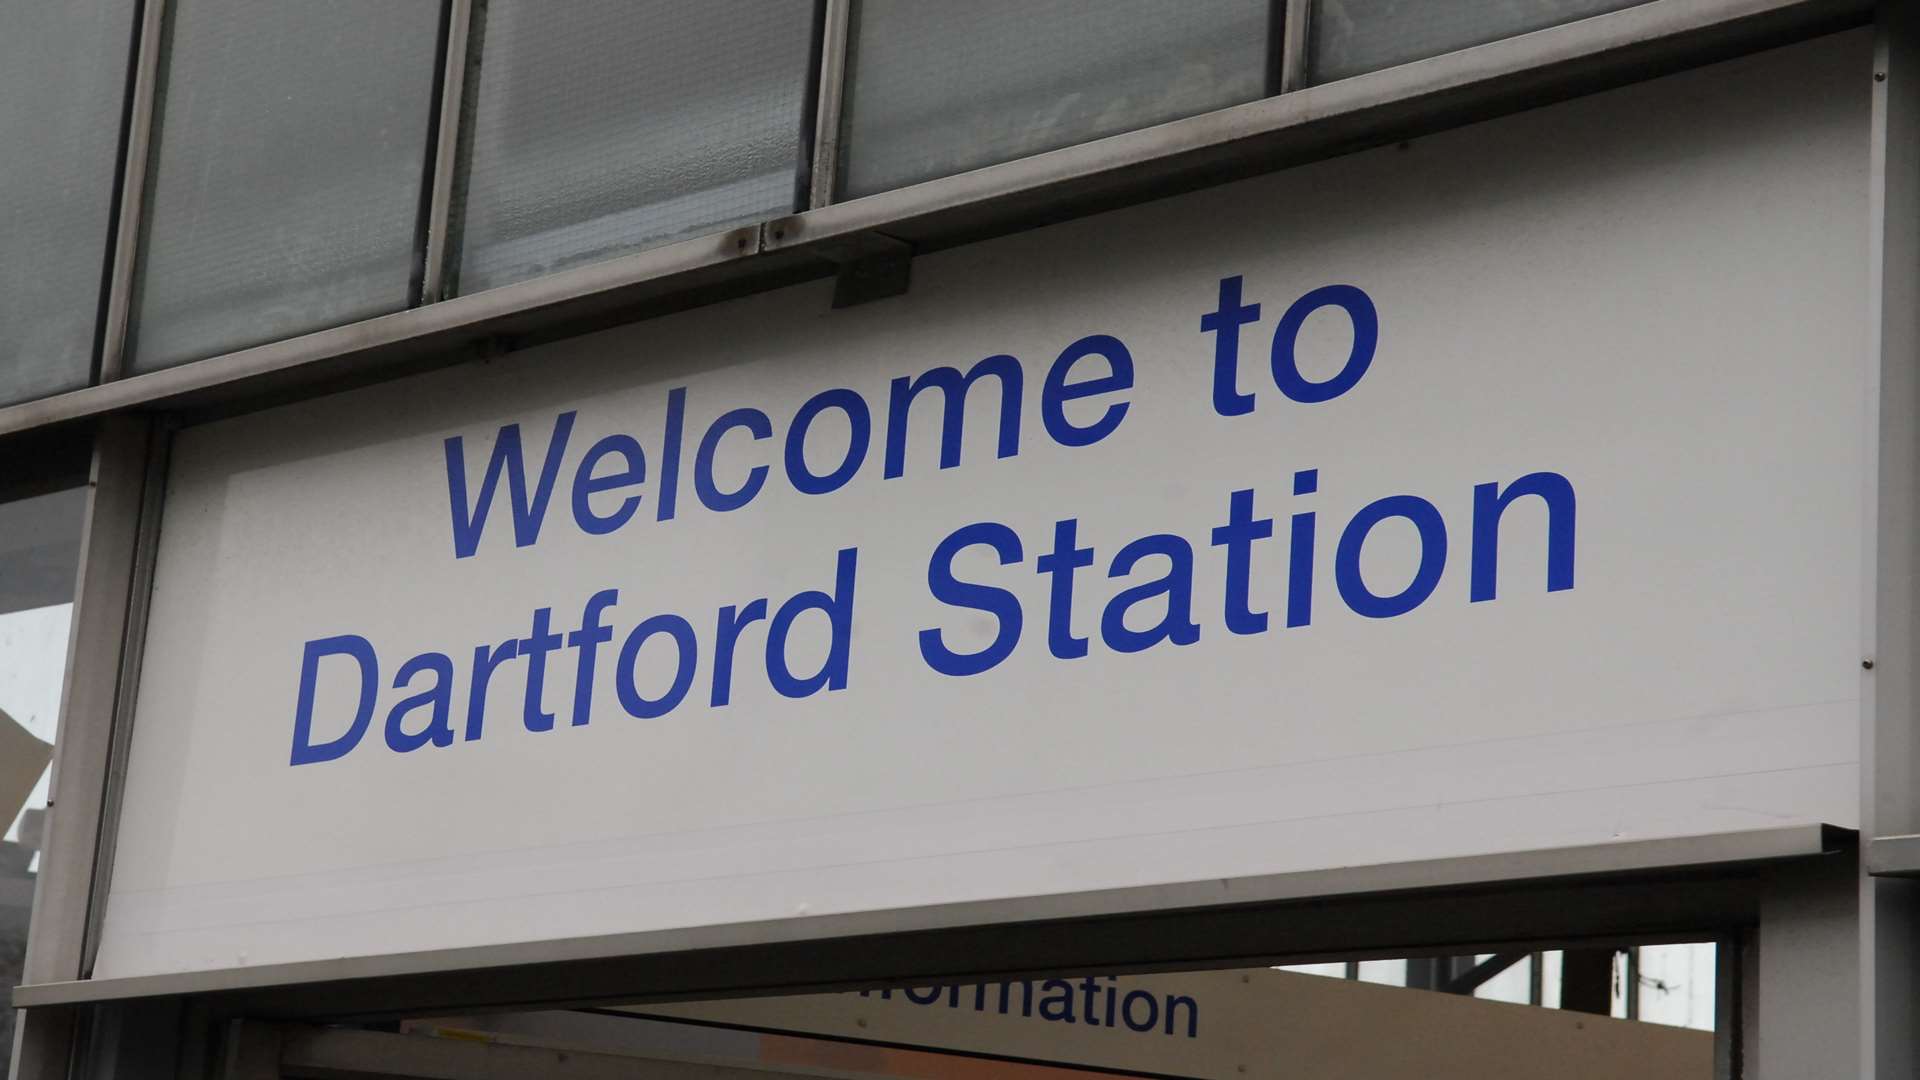 The offence happened on a train heading for Dartford train station